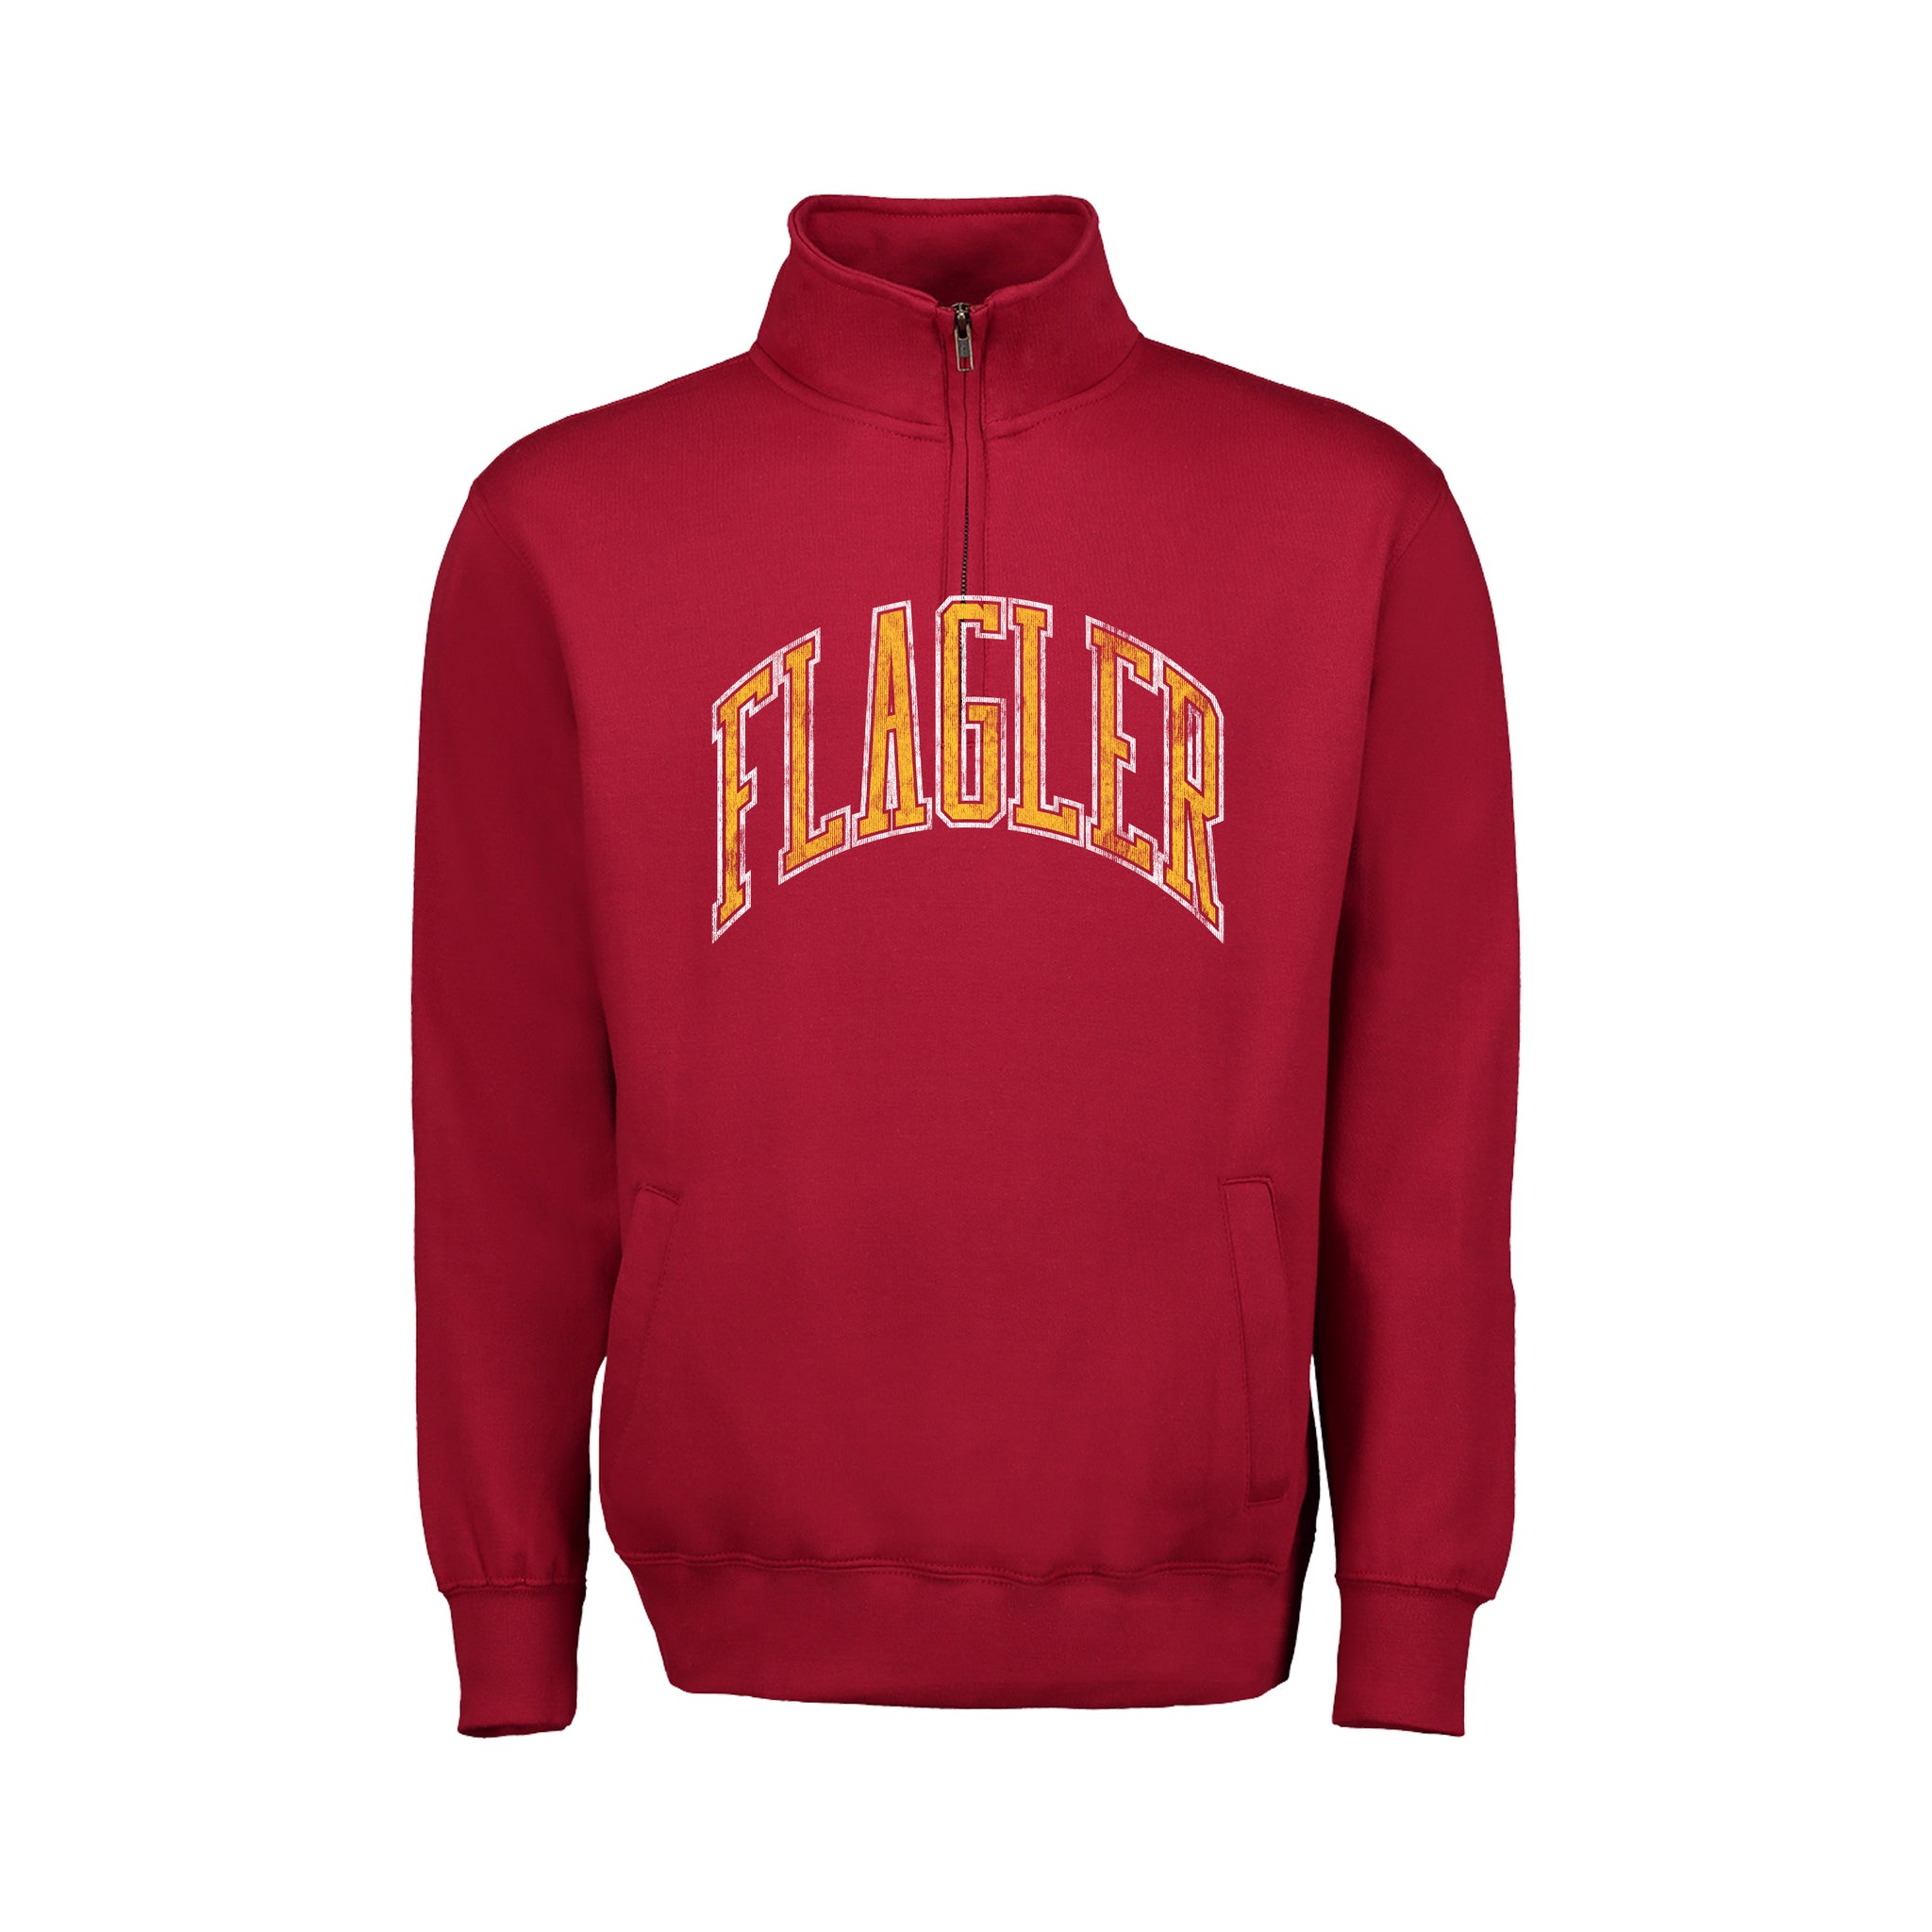 Crimson quarter zip with pocket and gold and white imprint saying Flagler